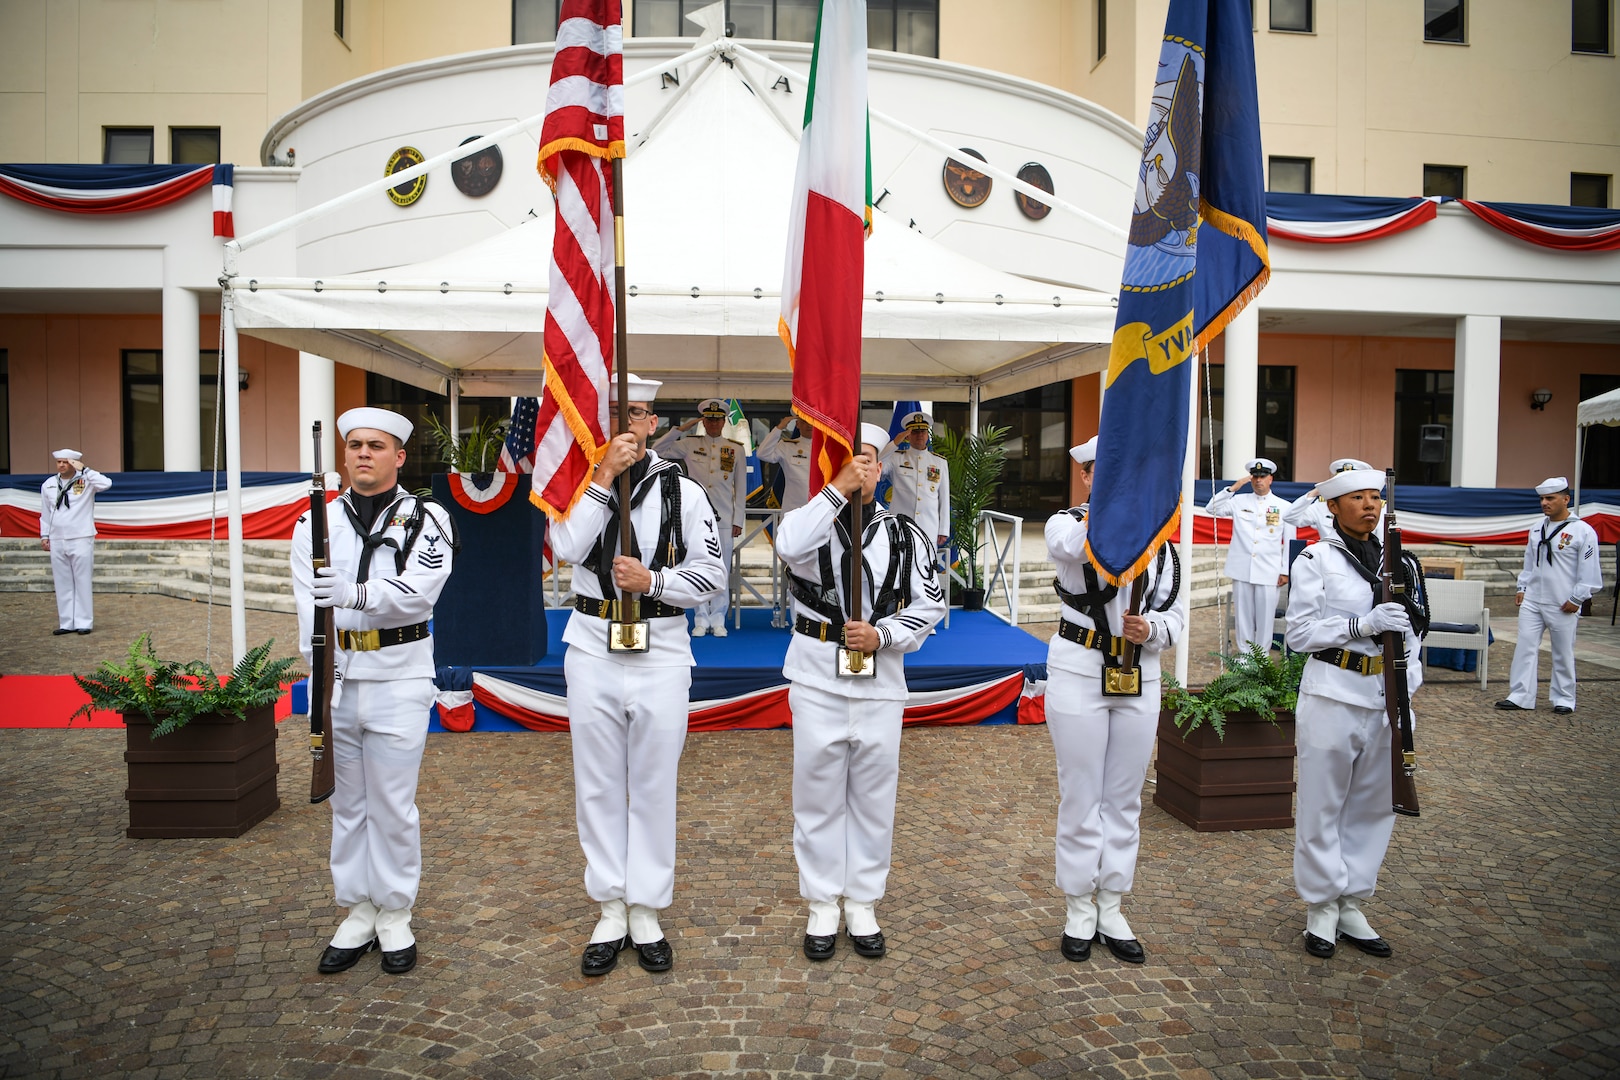 The U.S. Sixth Fleet color guard parades the colors during a change of command ceremony held on Naval Support Activity Naples, Italy, Sept. 15, 2022.